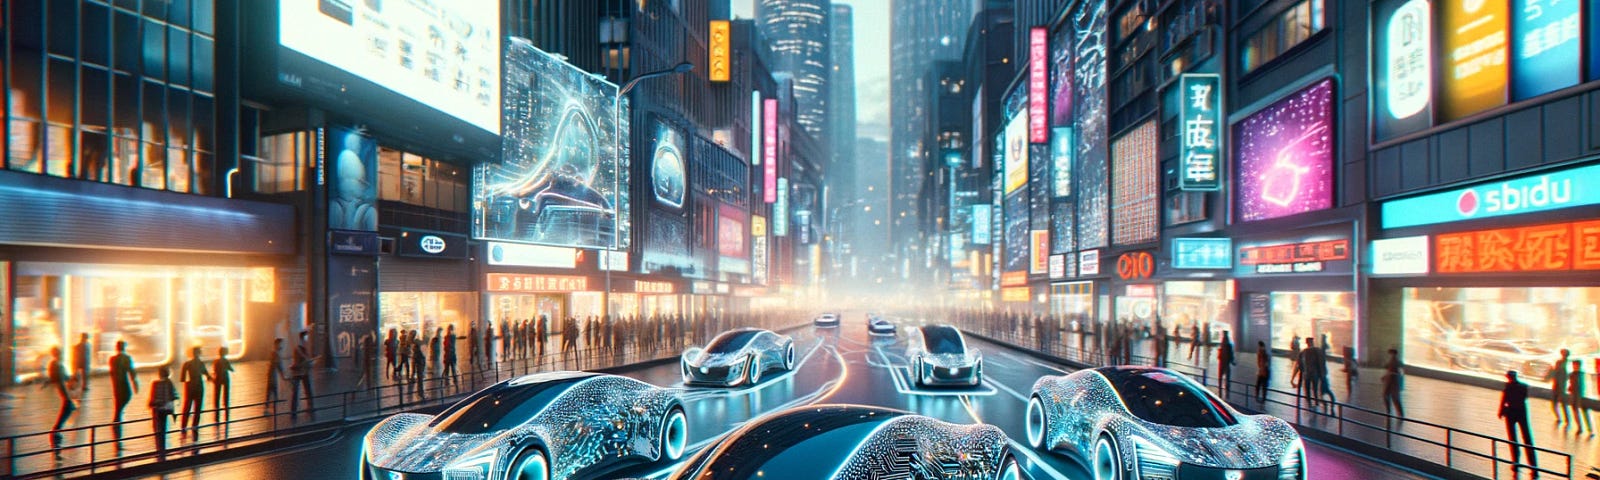 ChatGPT & DALL-E generated panoramic image of a city street filled with futuristic, sleek electric cars covered in glowing circuitry and emitting sparks, set in a vibrant, high-tech urban environment.